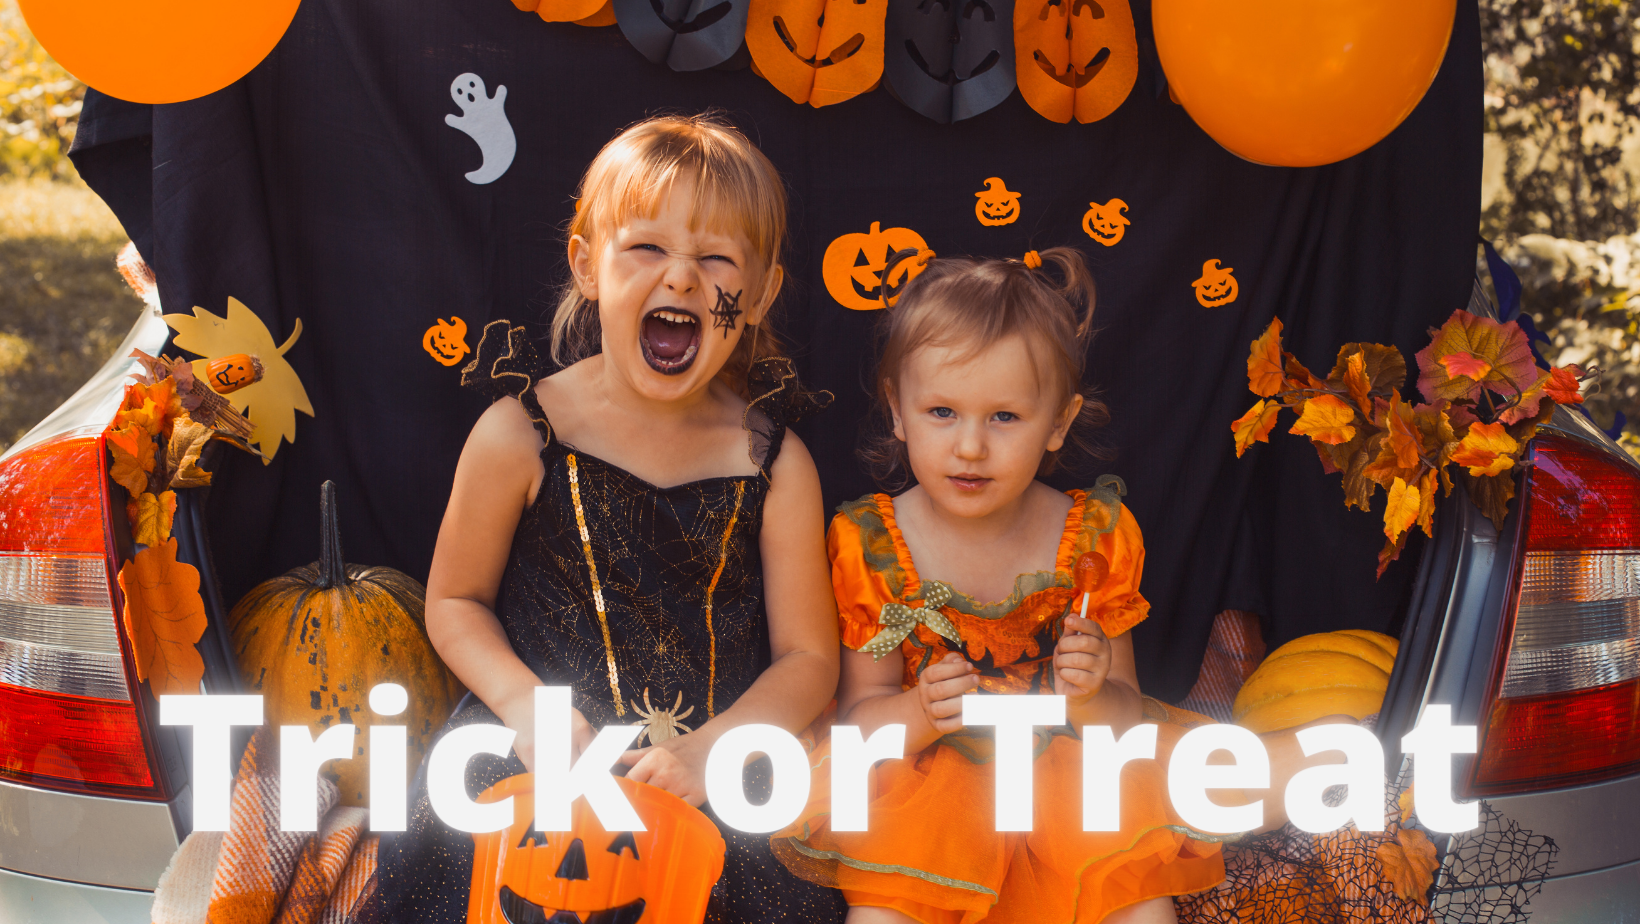 image of girl in costume at Halloween event that says, "Trick or Treat"